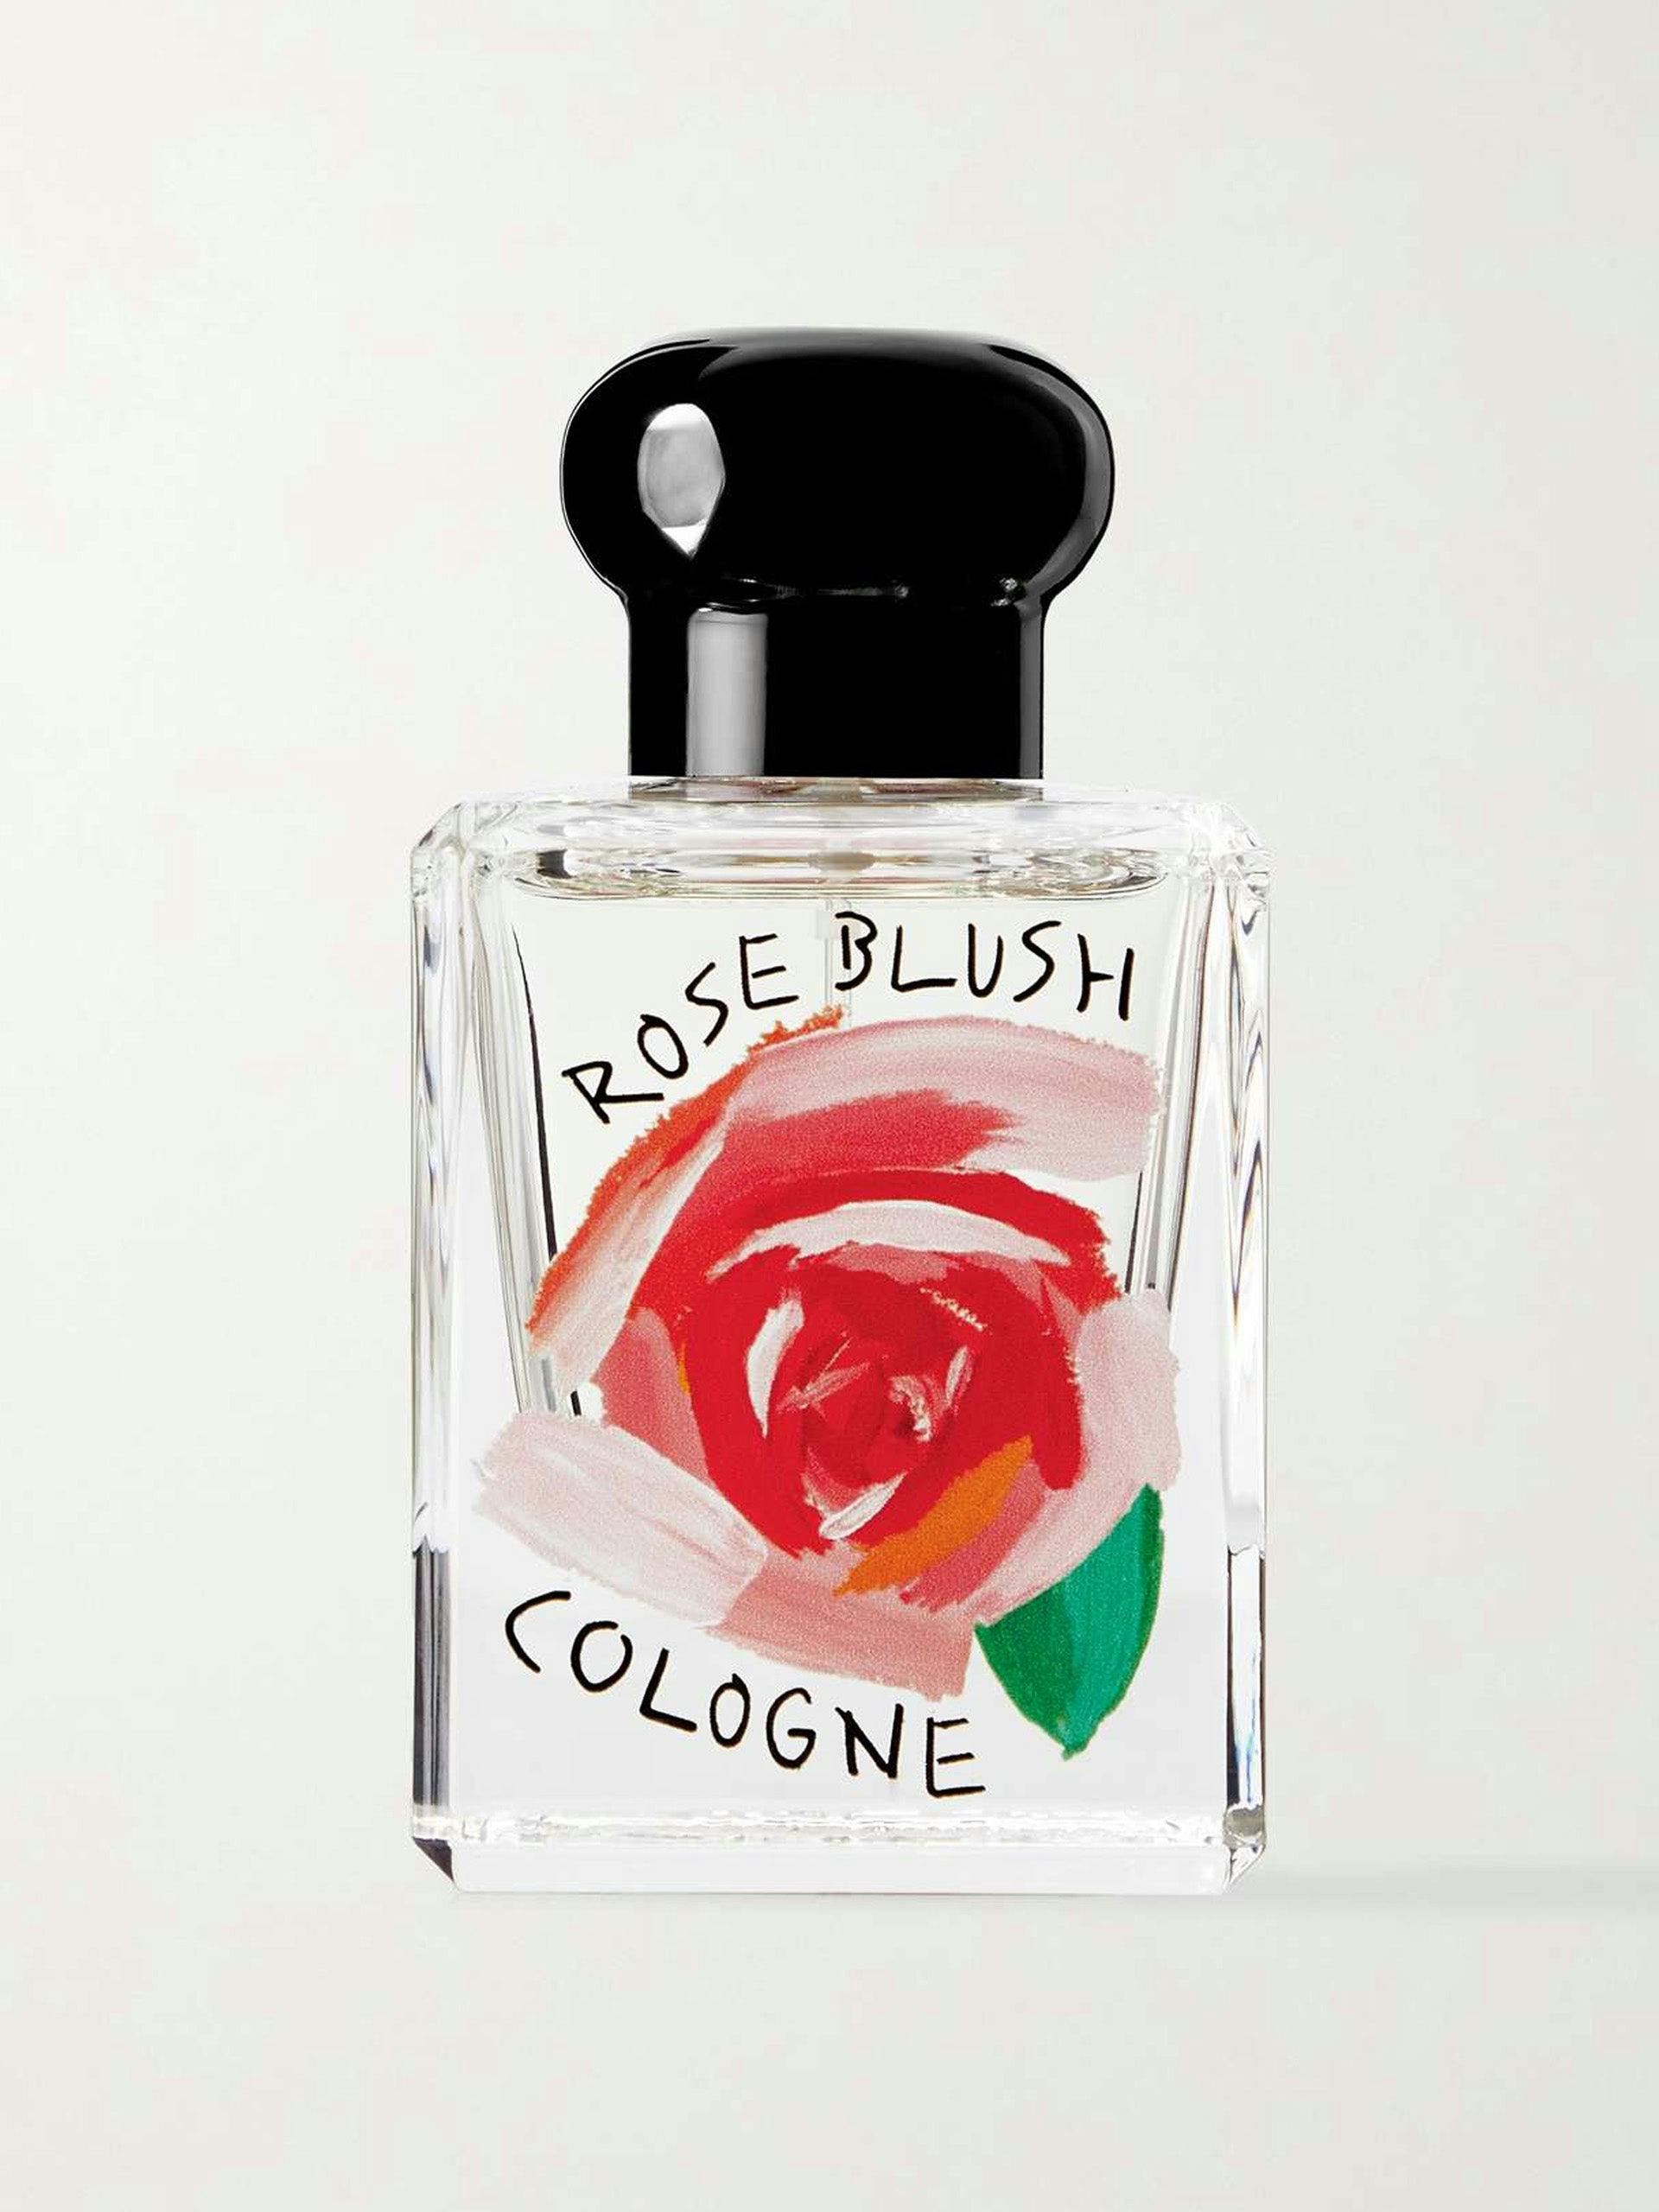 Limited Edition Rose Blush cologne